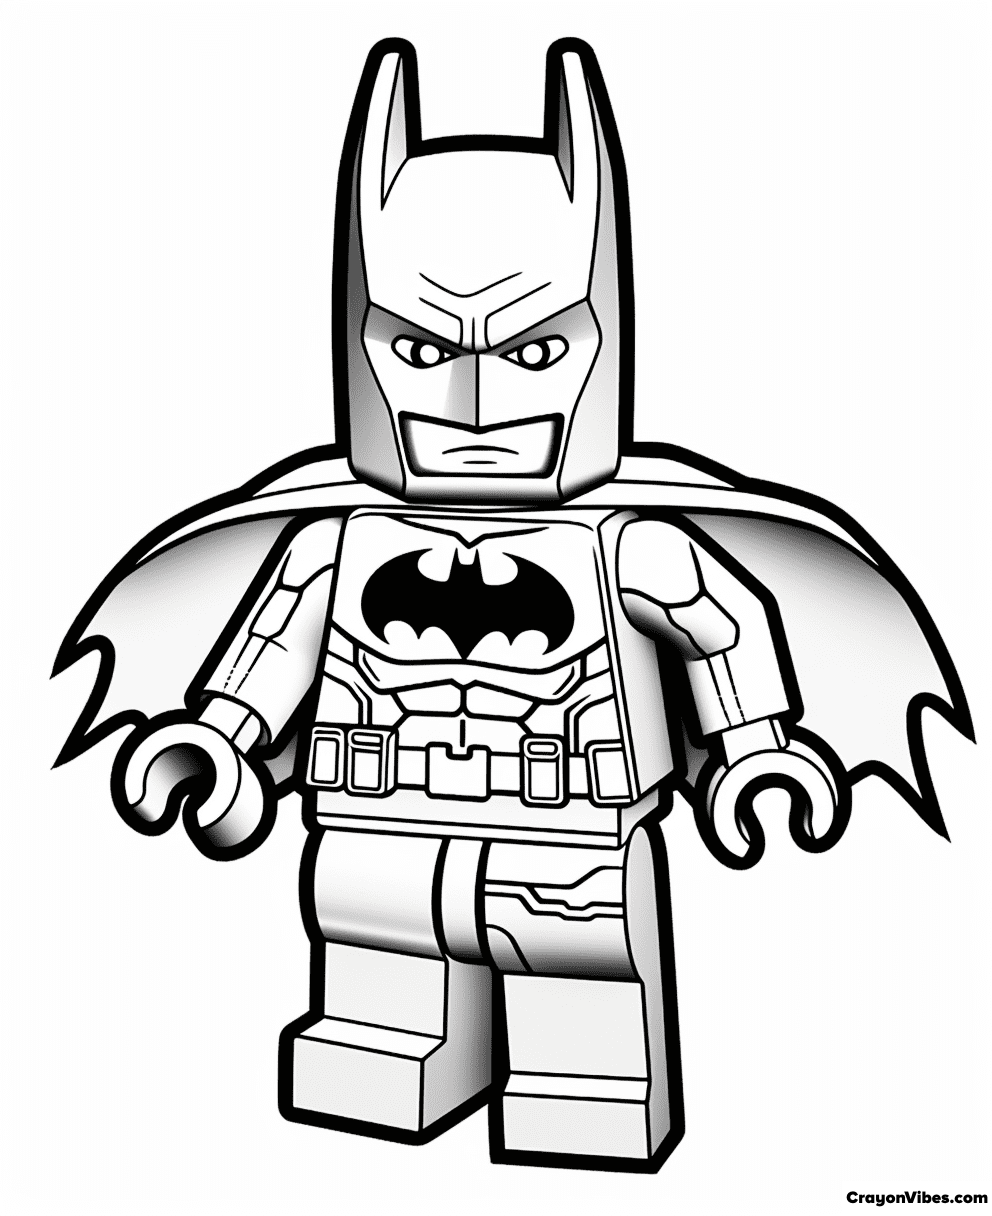 Lego Batman Coloring Pages Free Printables for Kids and Adults